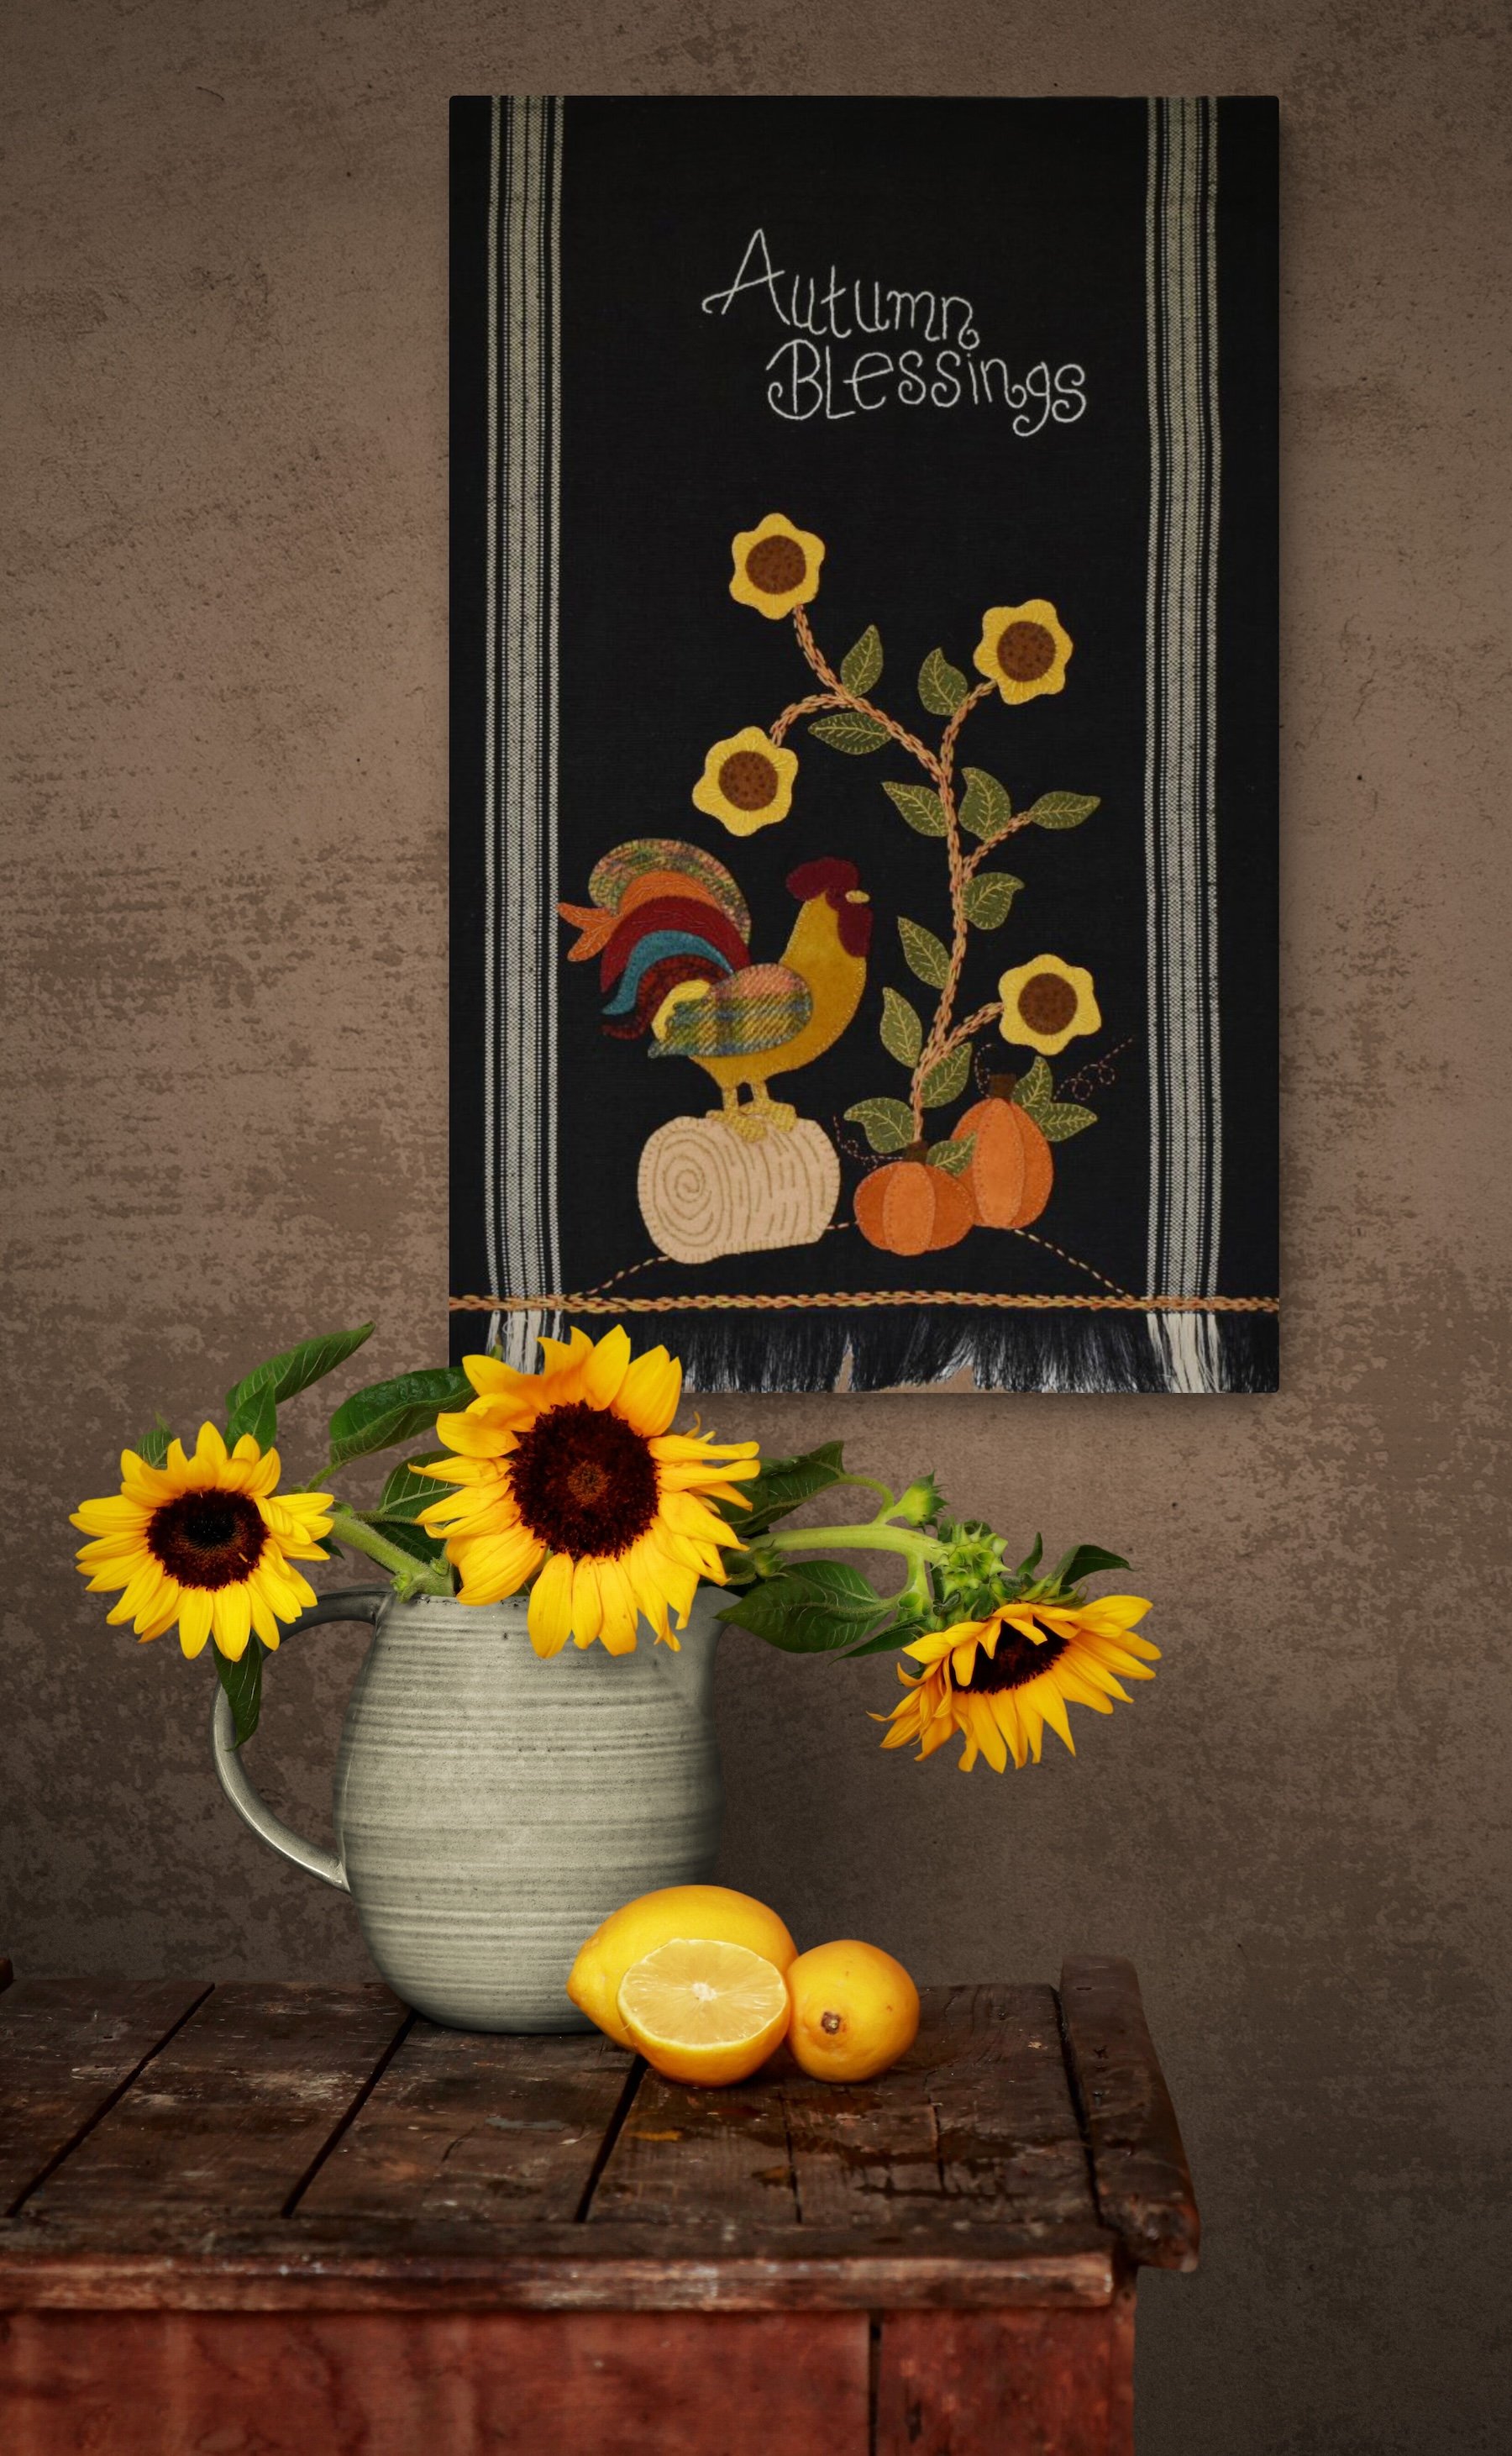 rustic-bench-with-sunflowers-in-jug.jpg